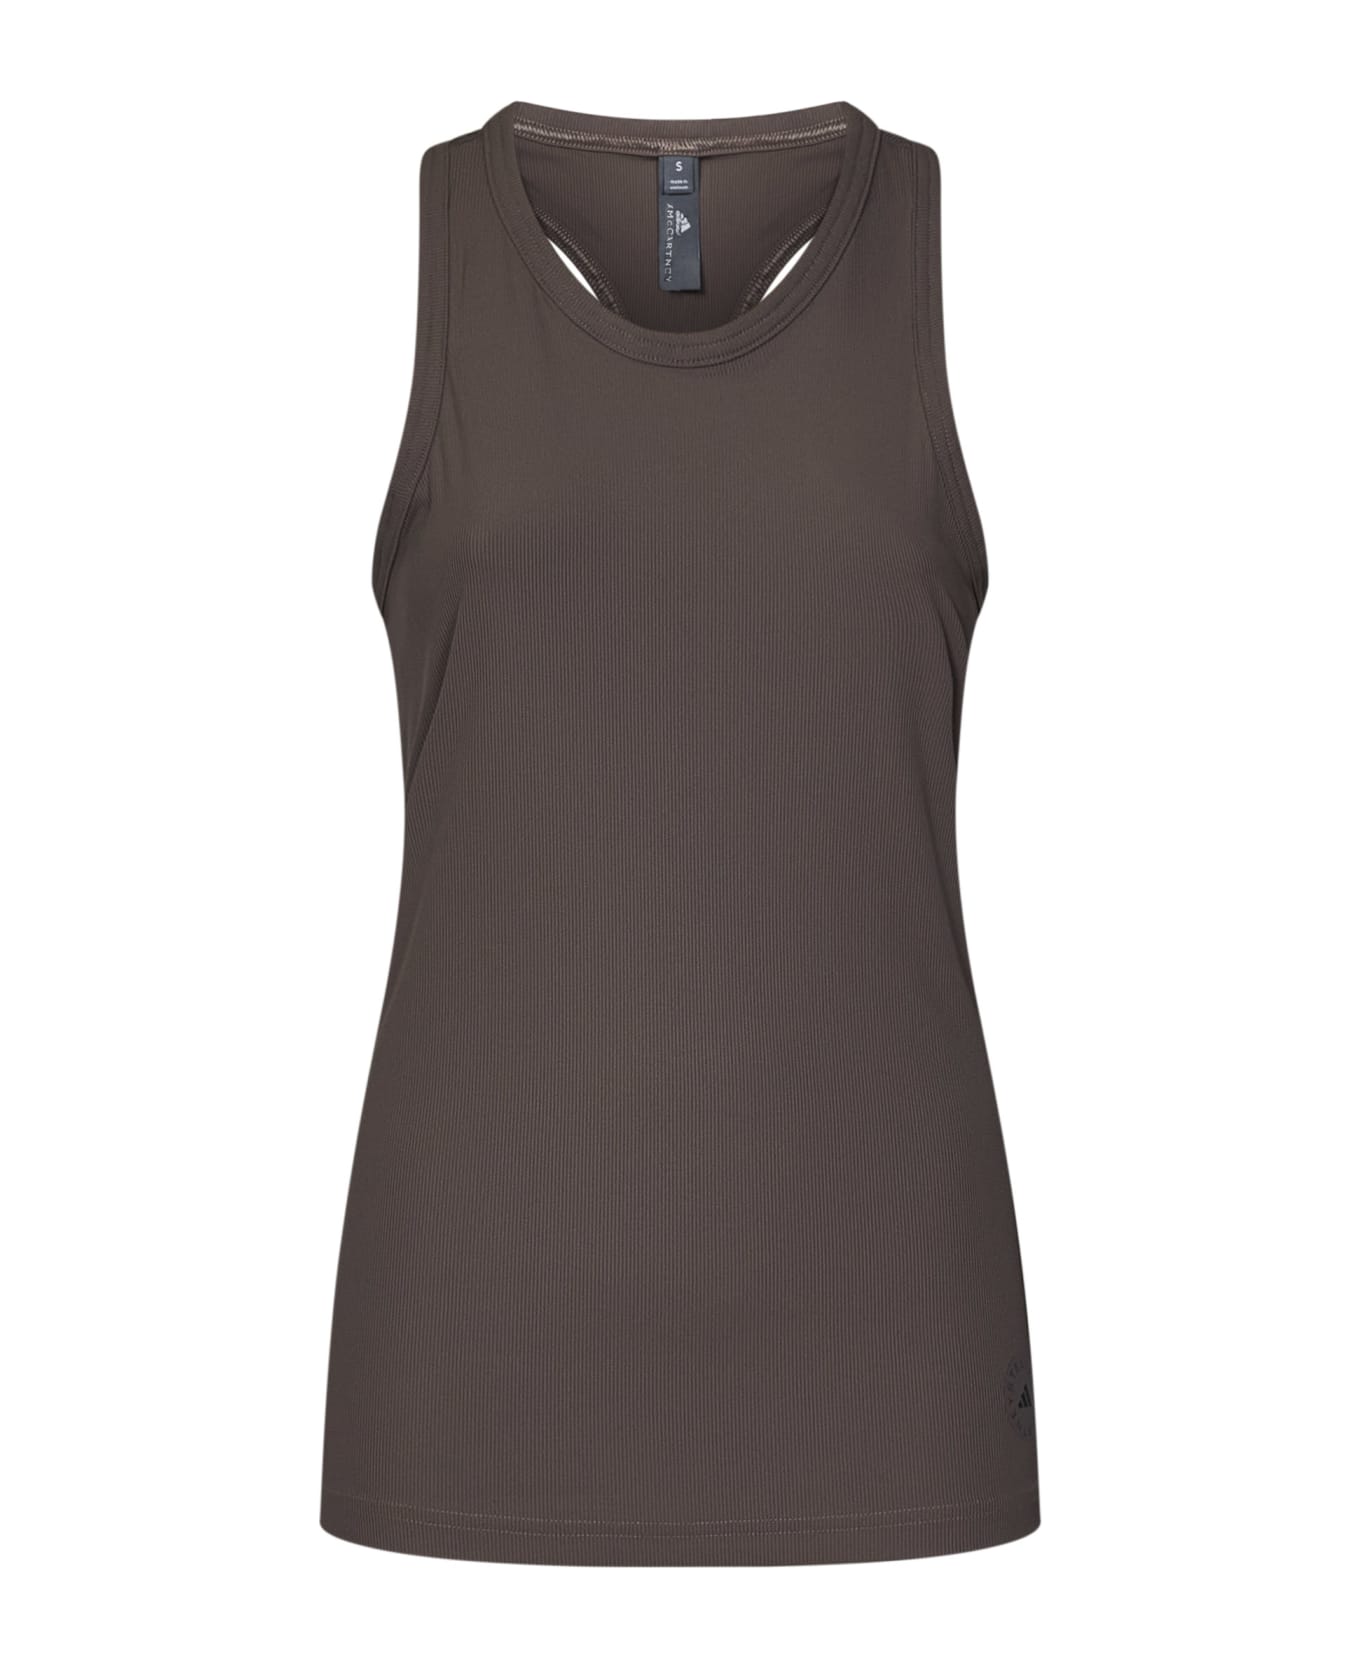 Adidas by Stella McCartney Top - Taupe